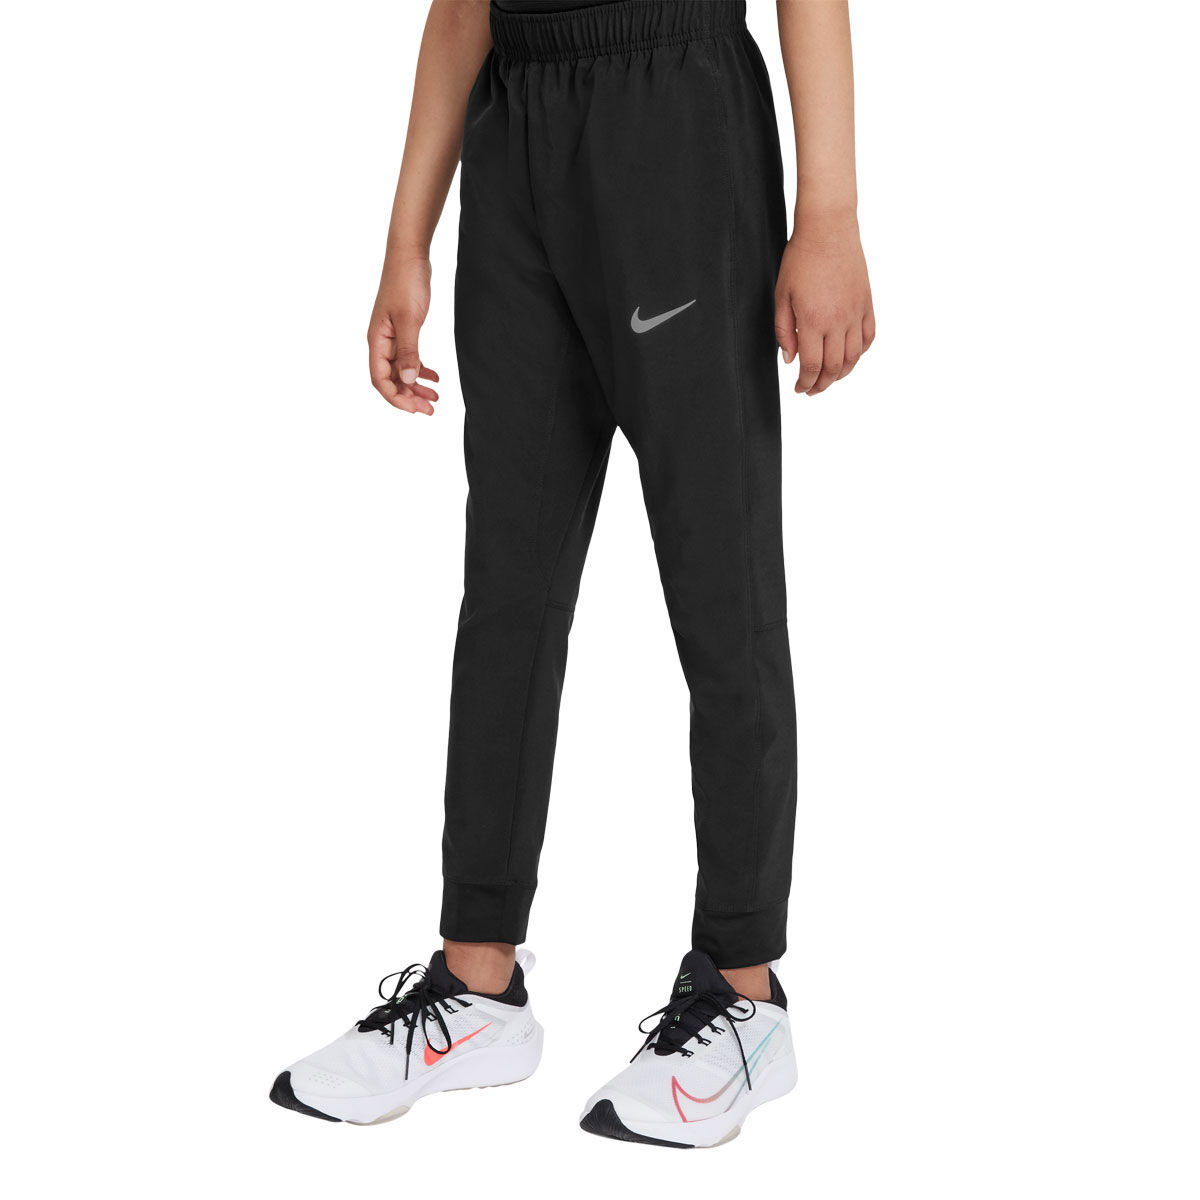 Boys' Track Pants - All in Motion Gray M 